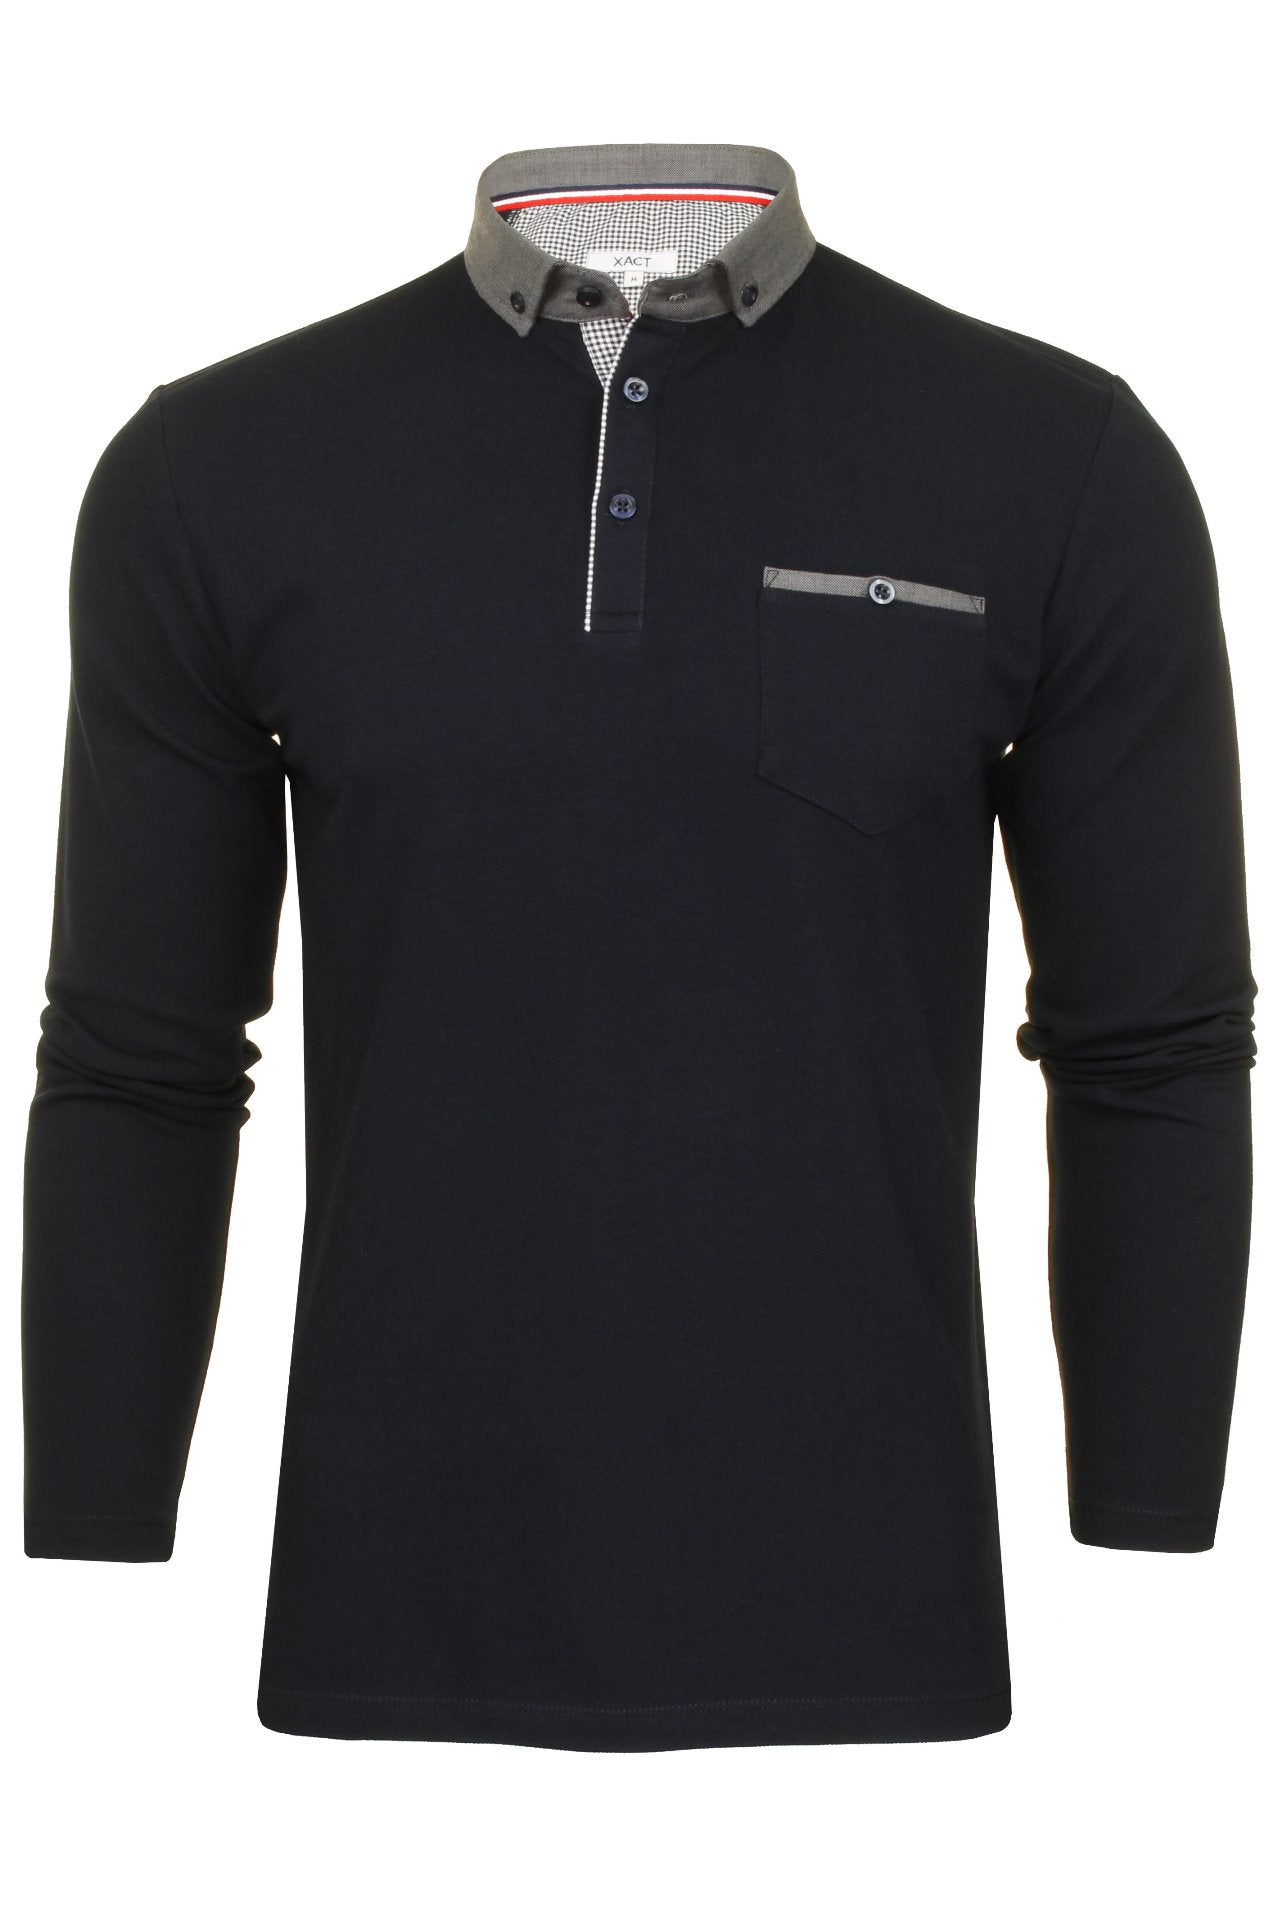 Mens Long Sleeved Button Down Collar Polo T-Shirt by Xact-Main Image